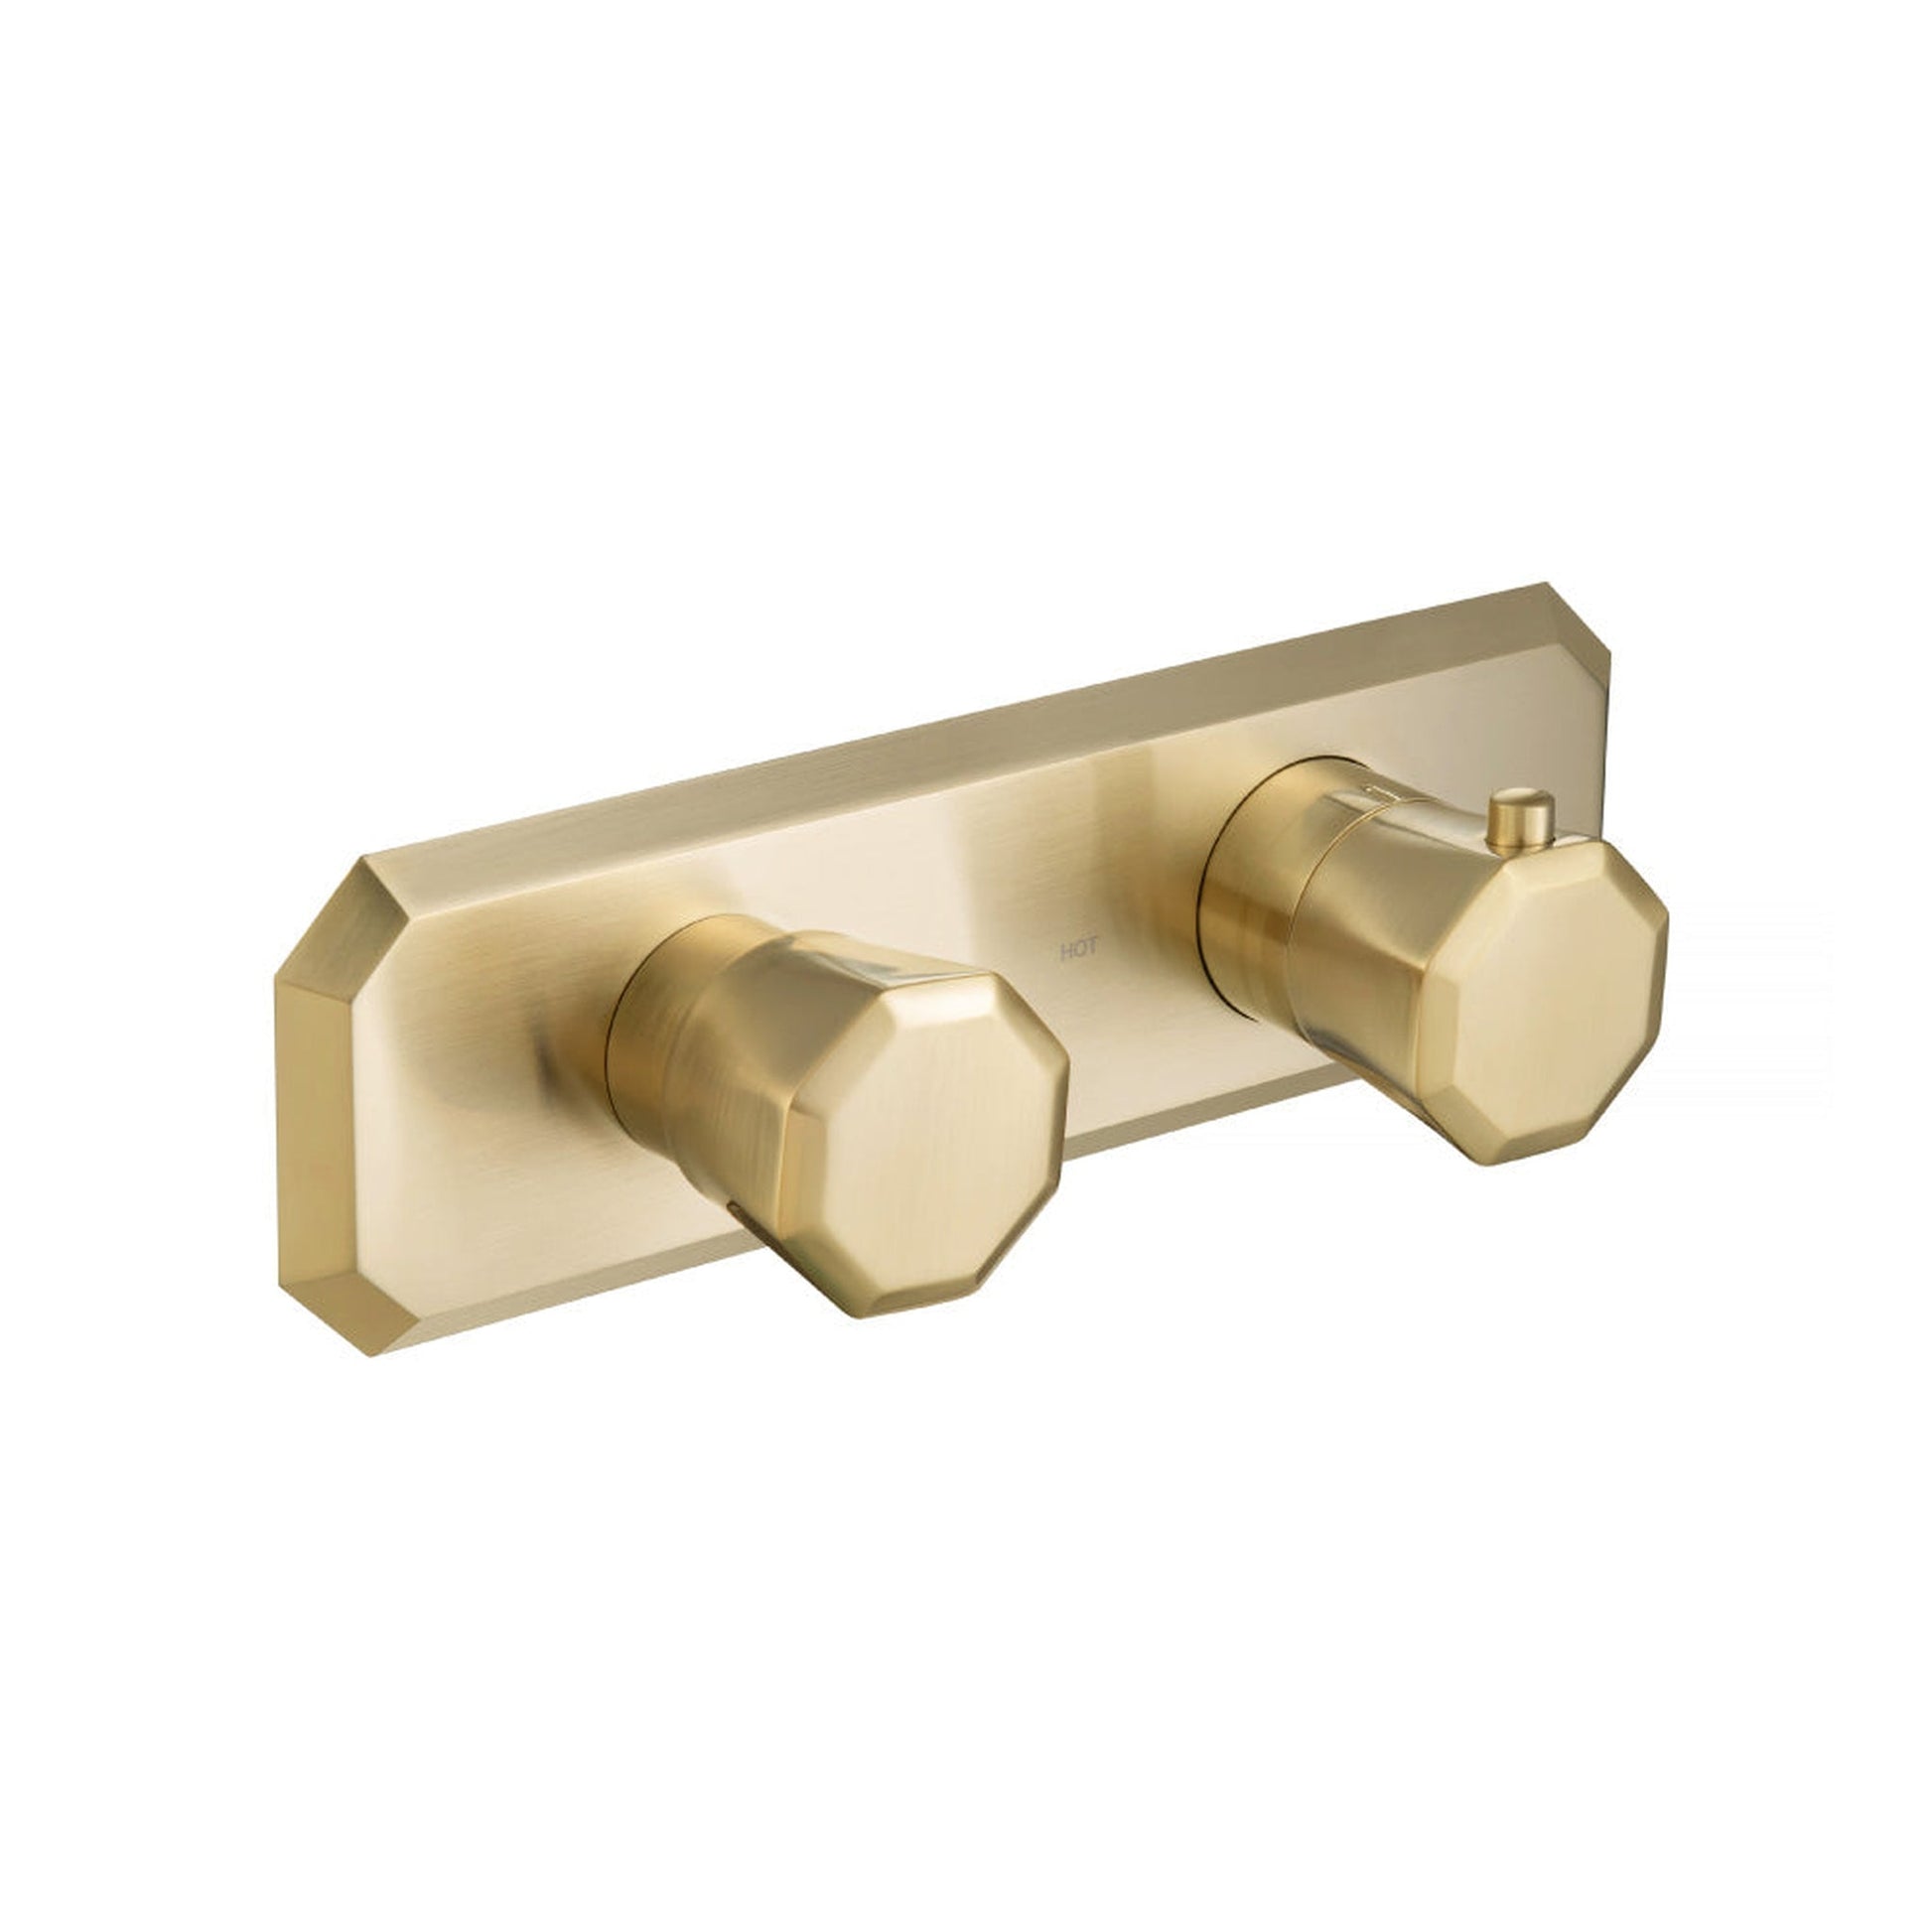 Isenberg Serie 230 Single Output Trim for Thermostatic Valve in Satin Brass